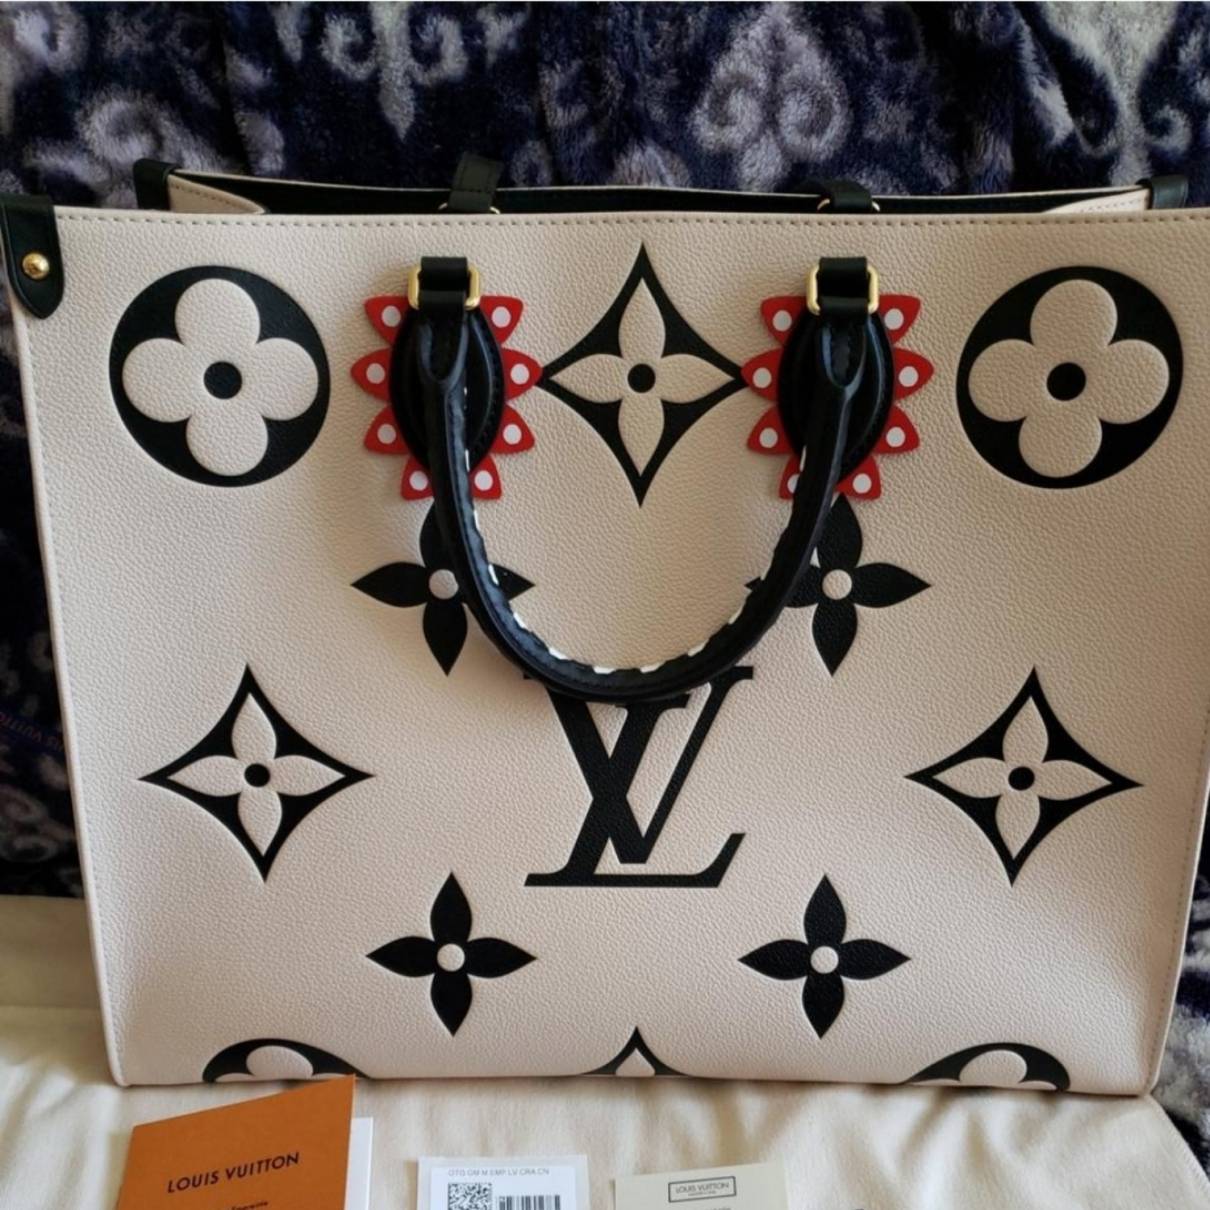 Louis Vuitton - Authenticated Onthego Handbag - Leather White for Women, Never Worn